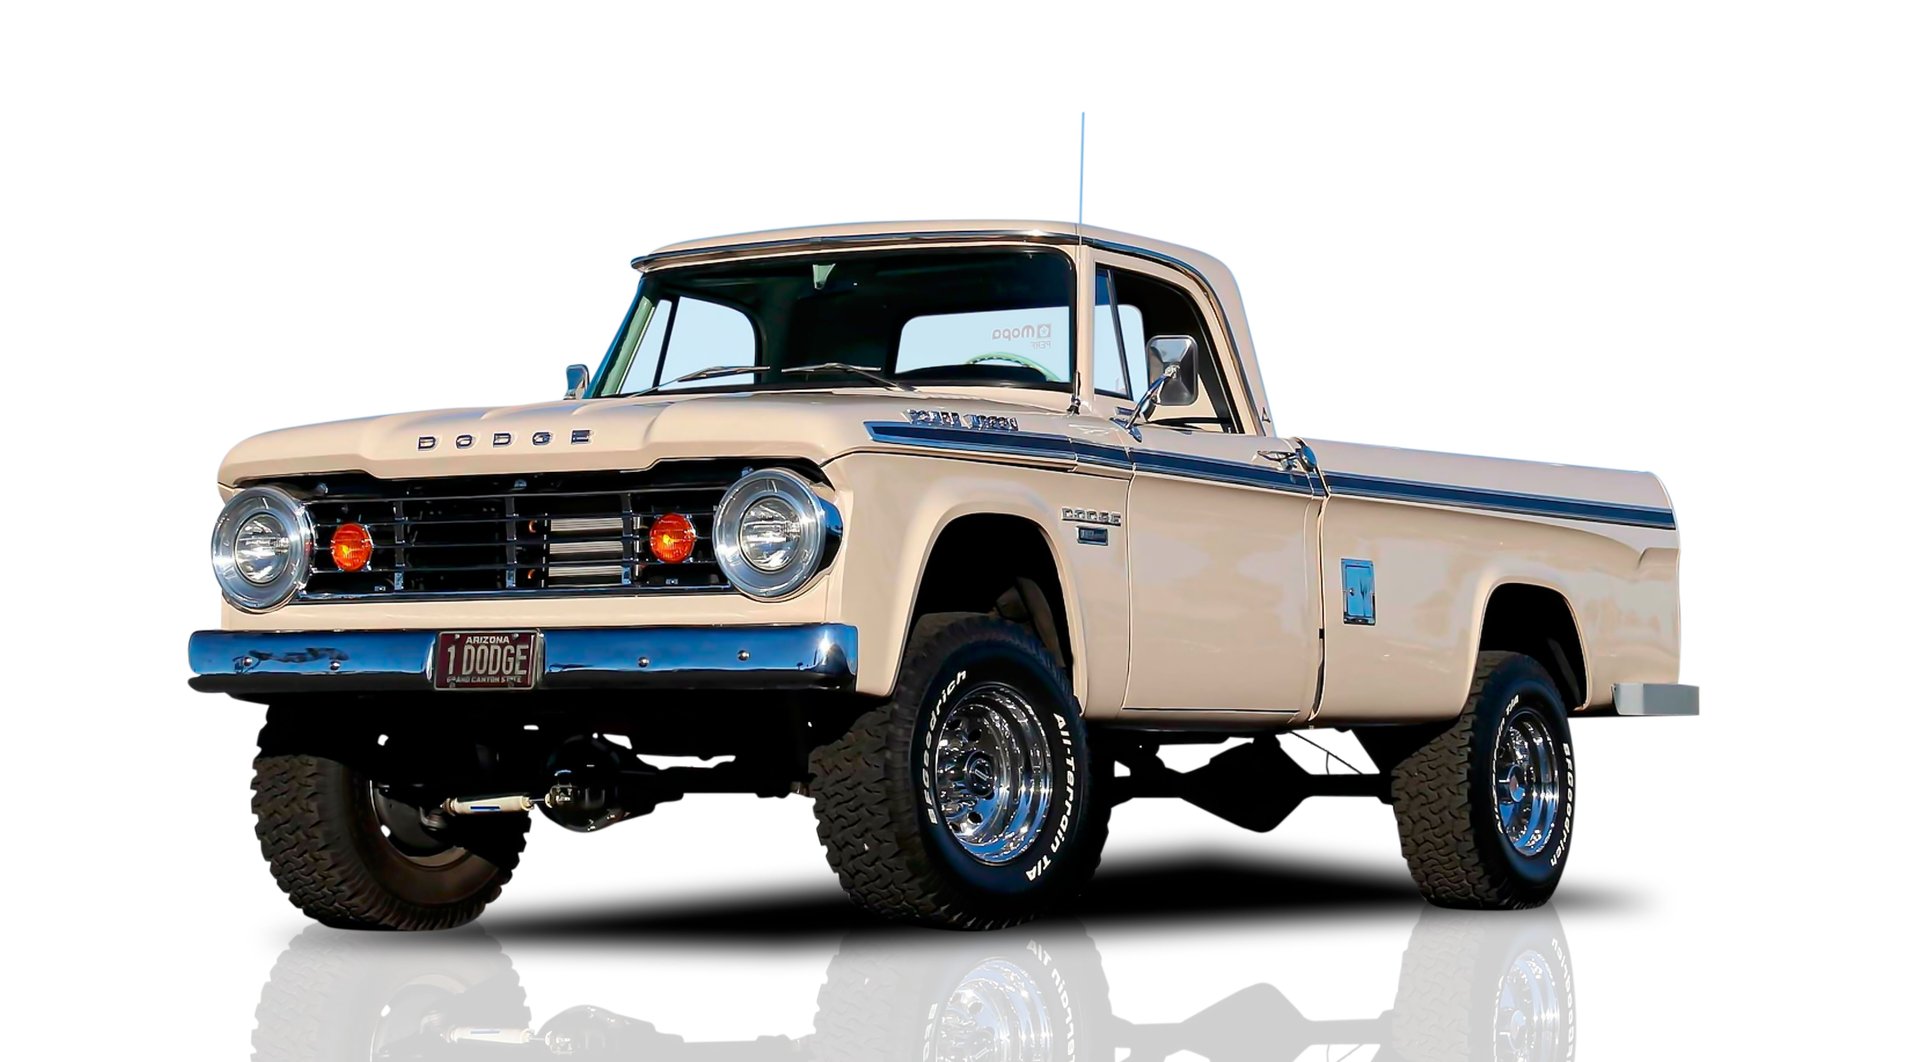 1967 Dodge D200 Pick Up Sold | Motorious